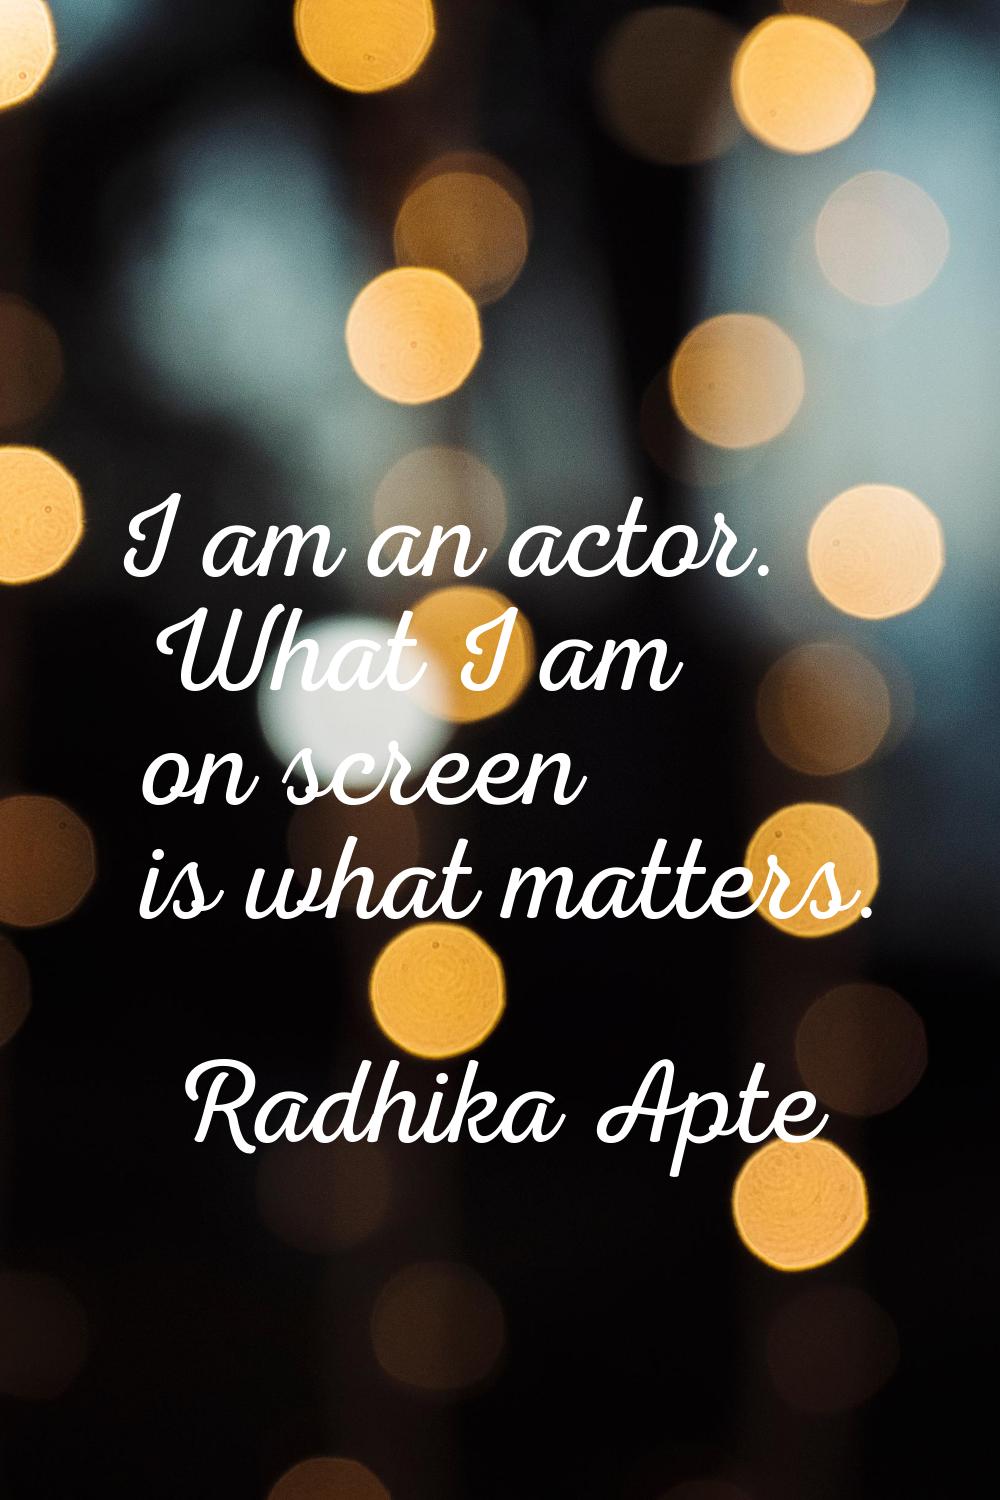 I am an actor. What I am on screen is what matters.